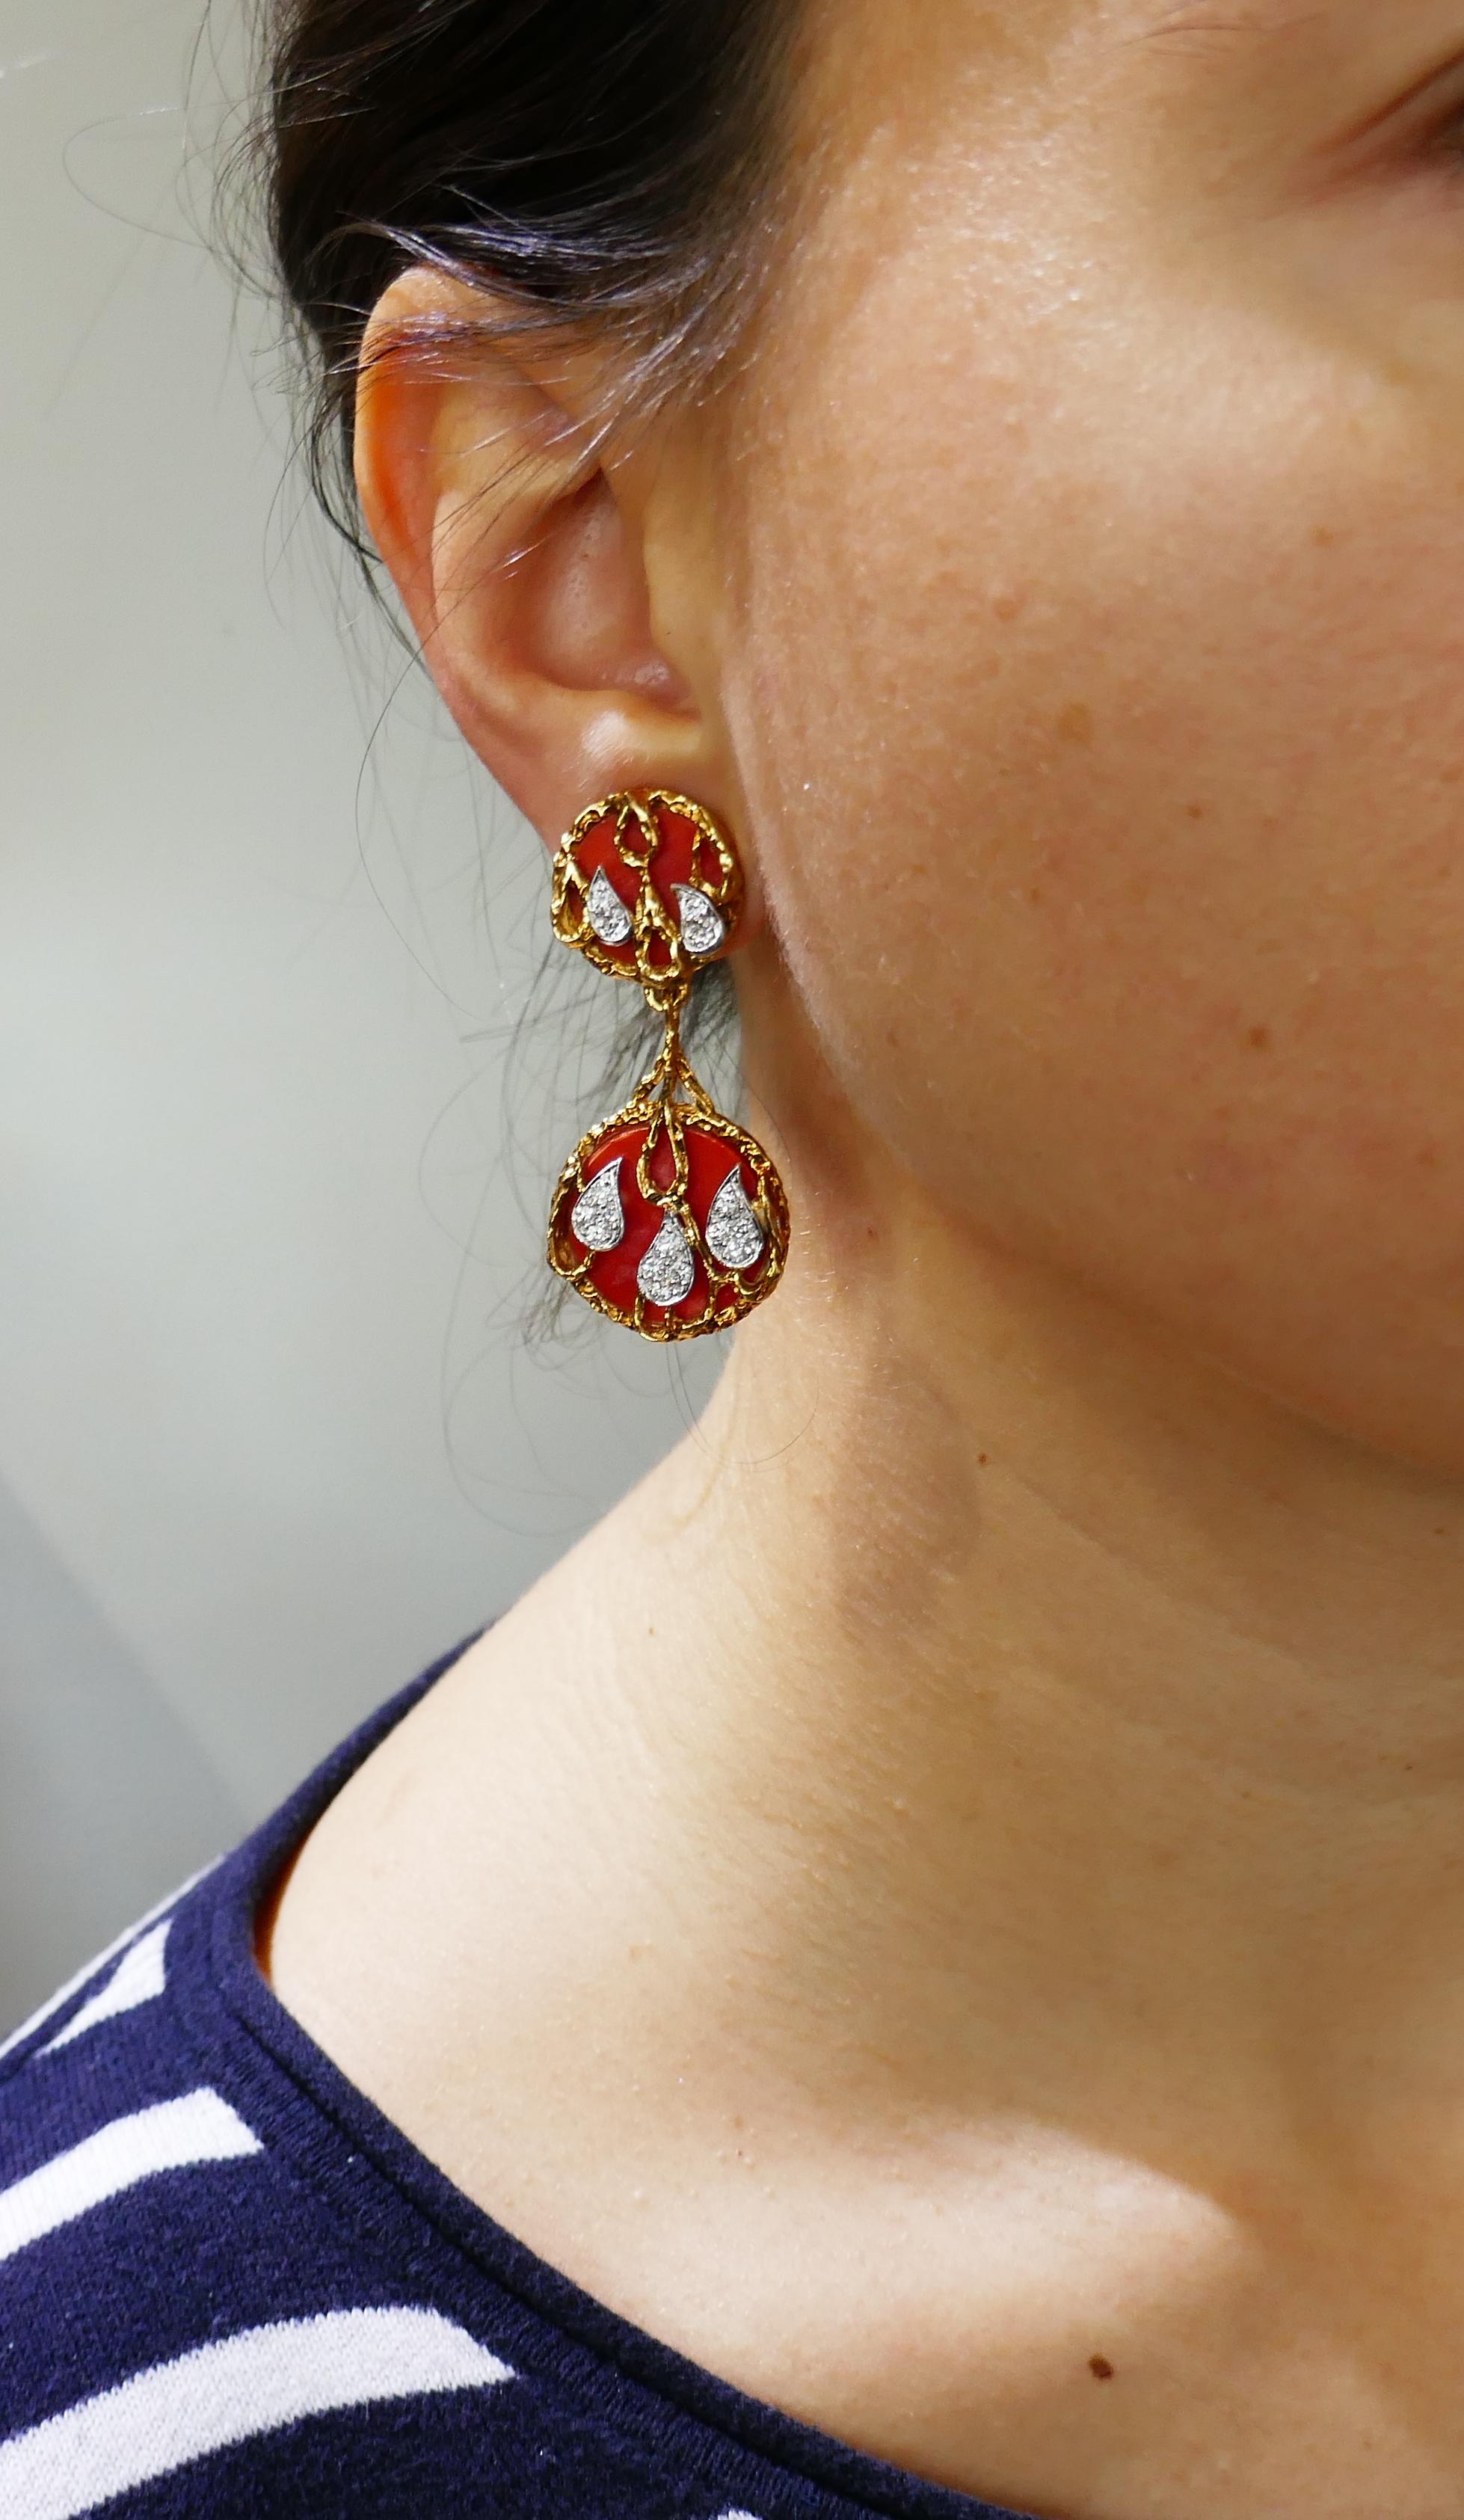 Bold and colorful earrings created by Kutchinsky in the 1970's. Elegant, stylish and wearable, the earrings are a great addition to your jewelry collection. They make a tasteful compliment to a casual or dressy outfit. 
The earrings are made of 18